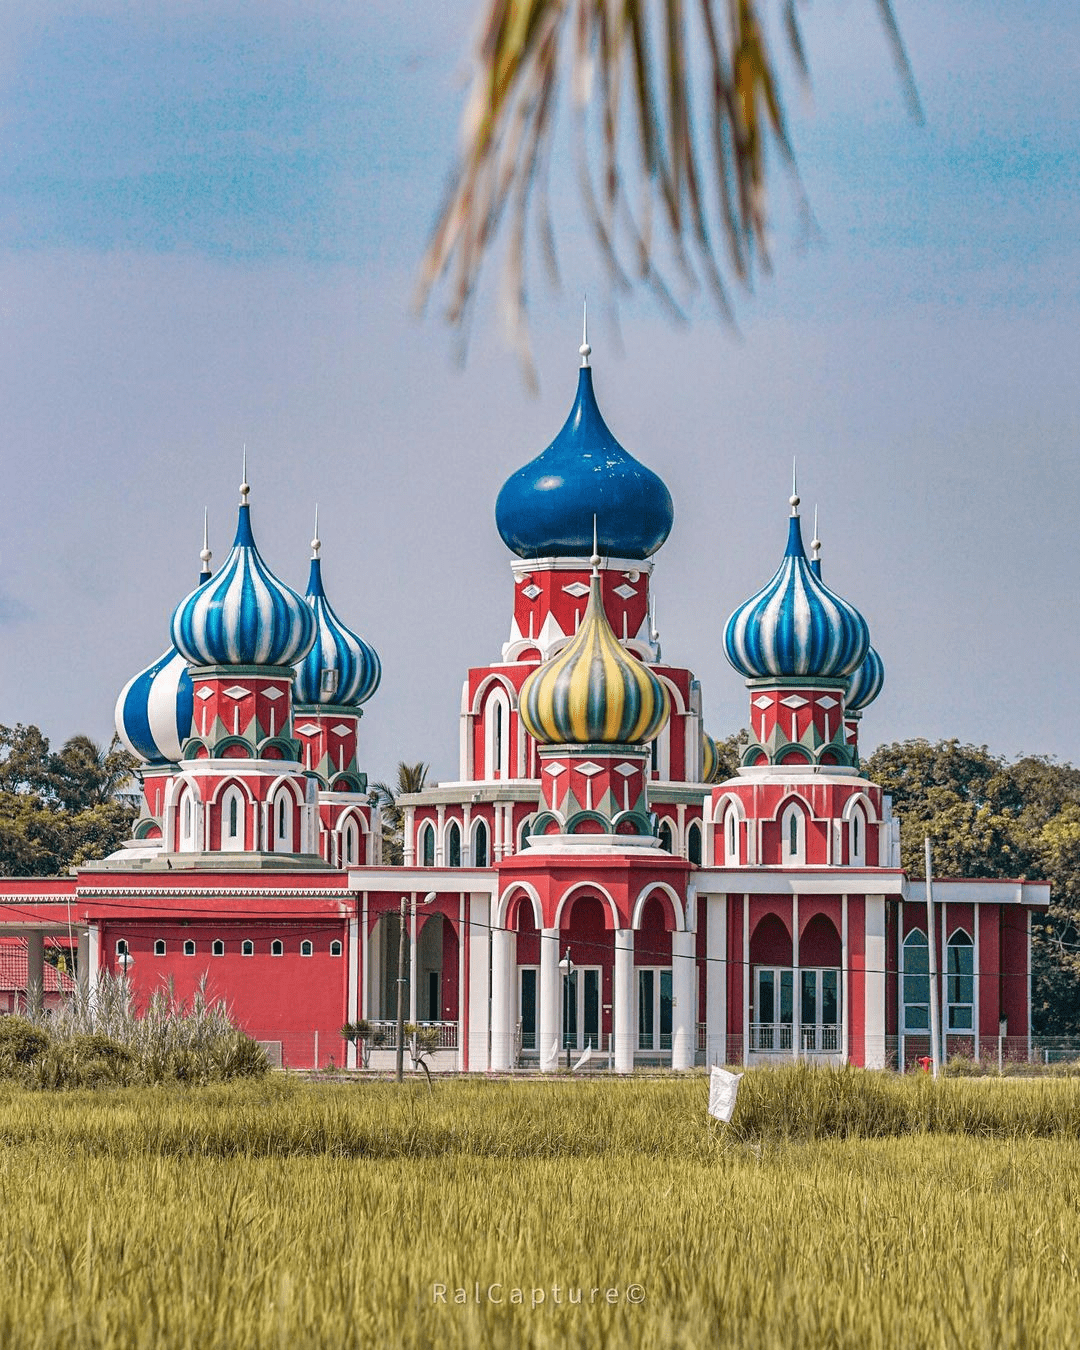 Unique mosques in Malaysia 2 - Masjid Lapan Kubah